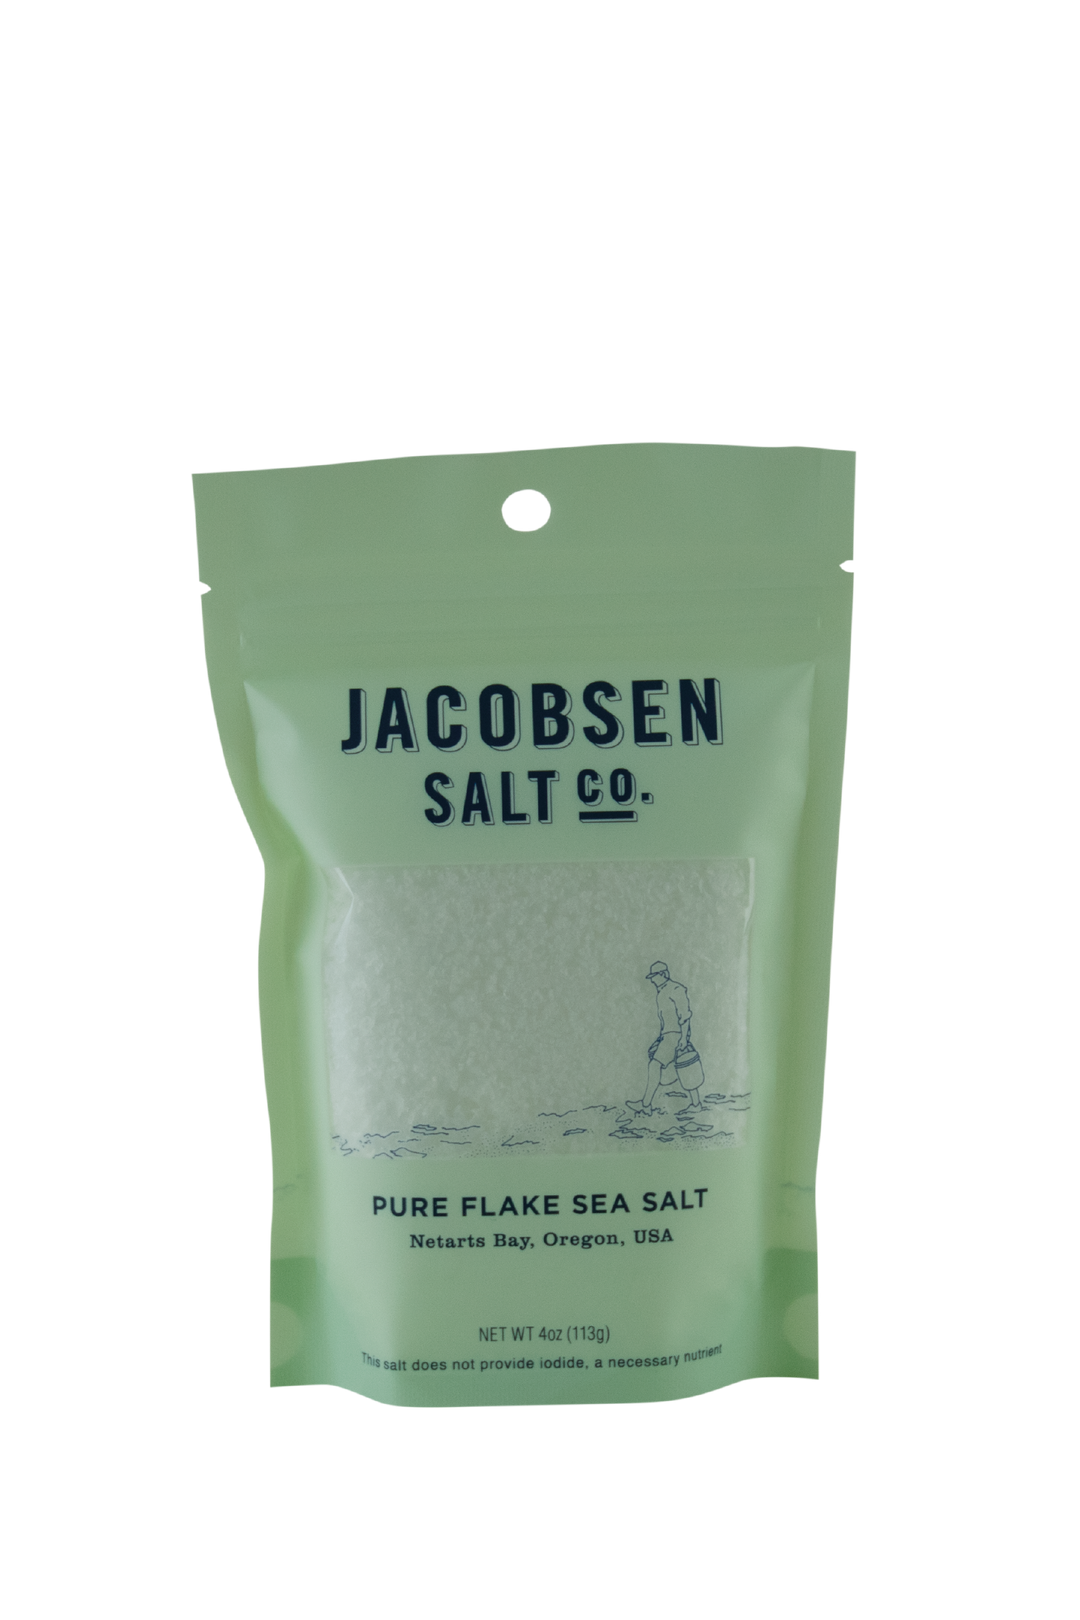 A 4 Oz Pouch Of Jacobsen salt Co's Pure Flake Sea Salt In A Celeste Green Pouch and a Clear Window Showing the Texture Of The Salt. Label says, "This salt does not provide iodide, a necessary nutrient."